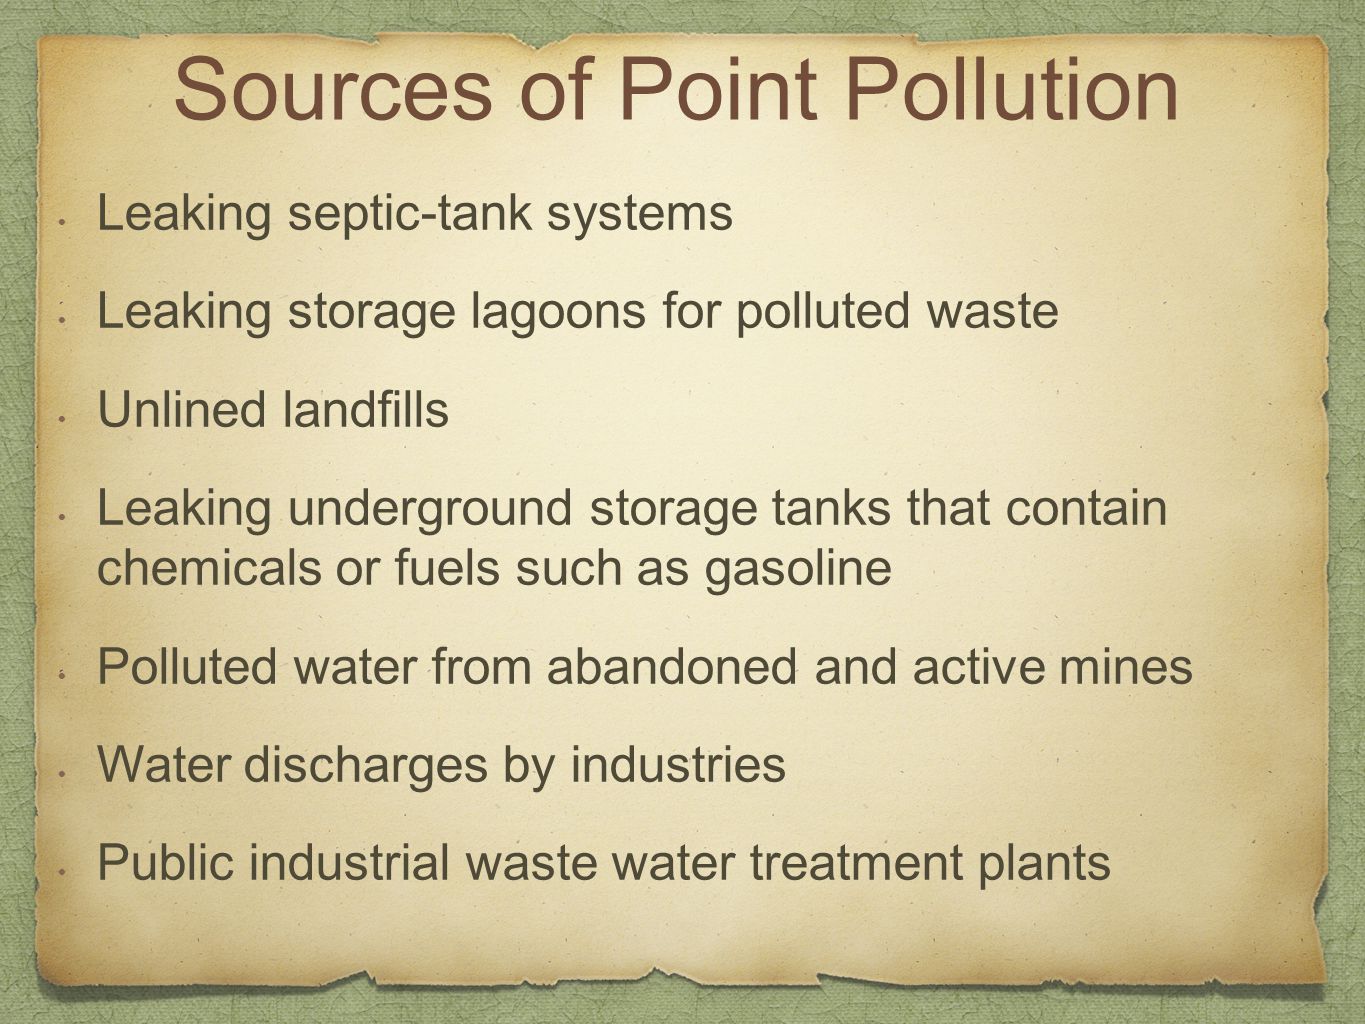 Sources of Point Pollution